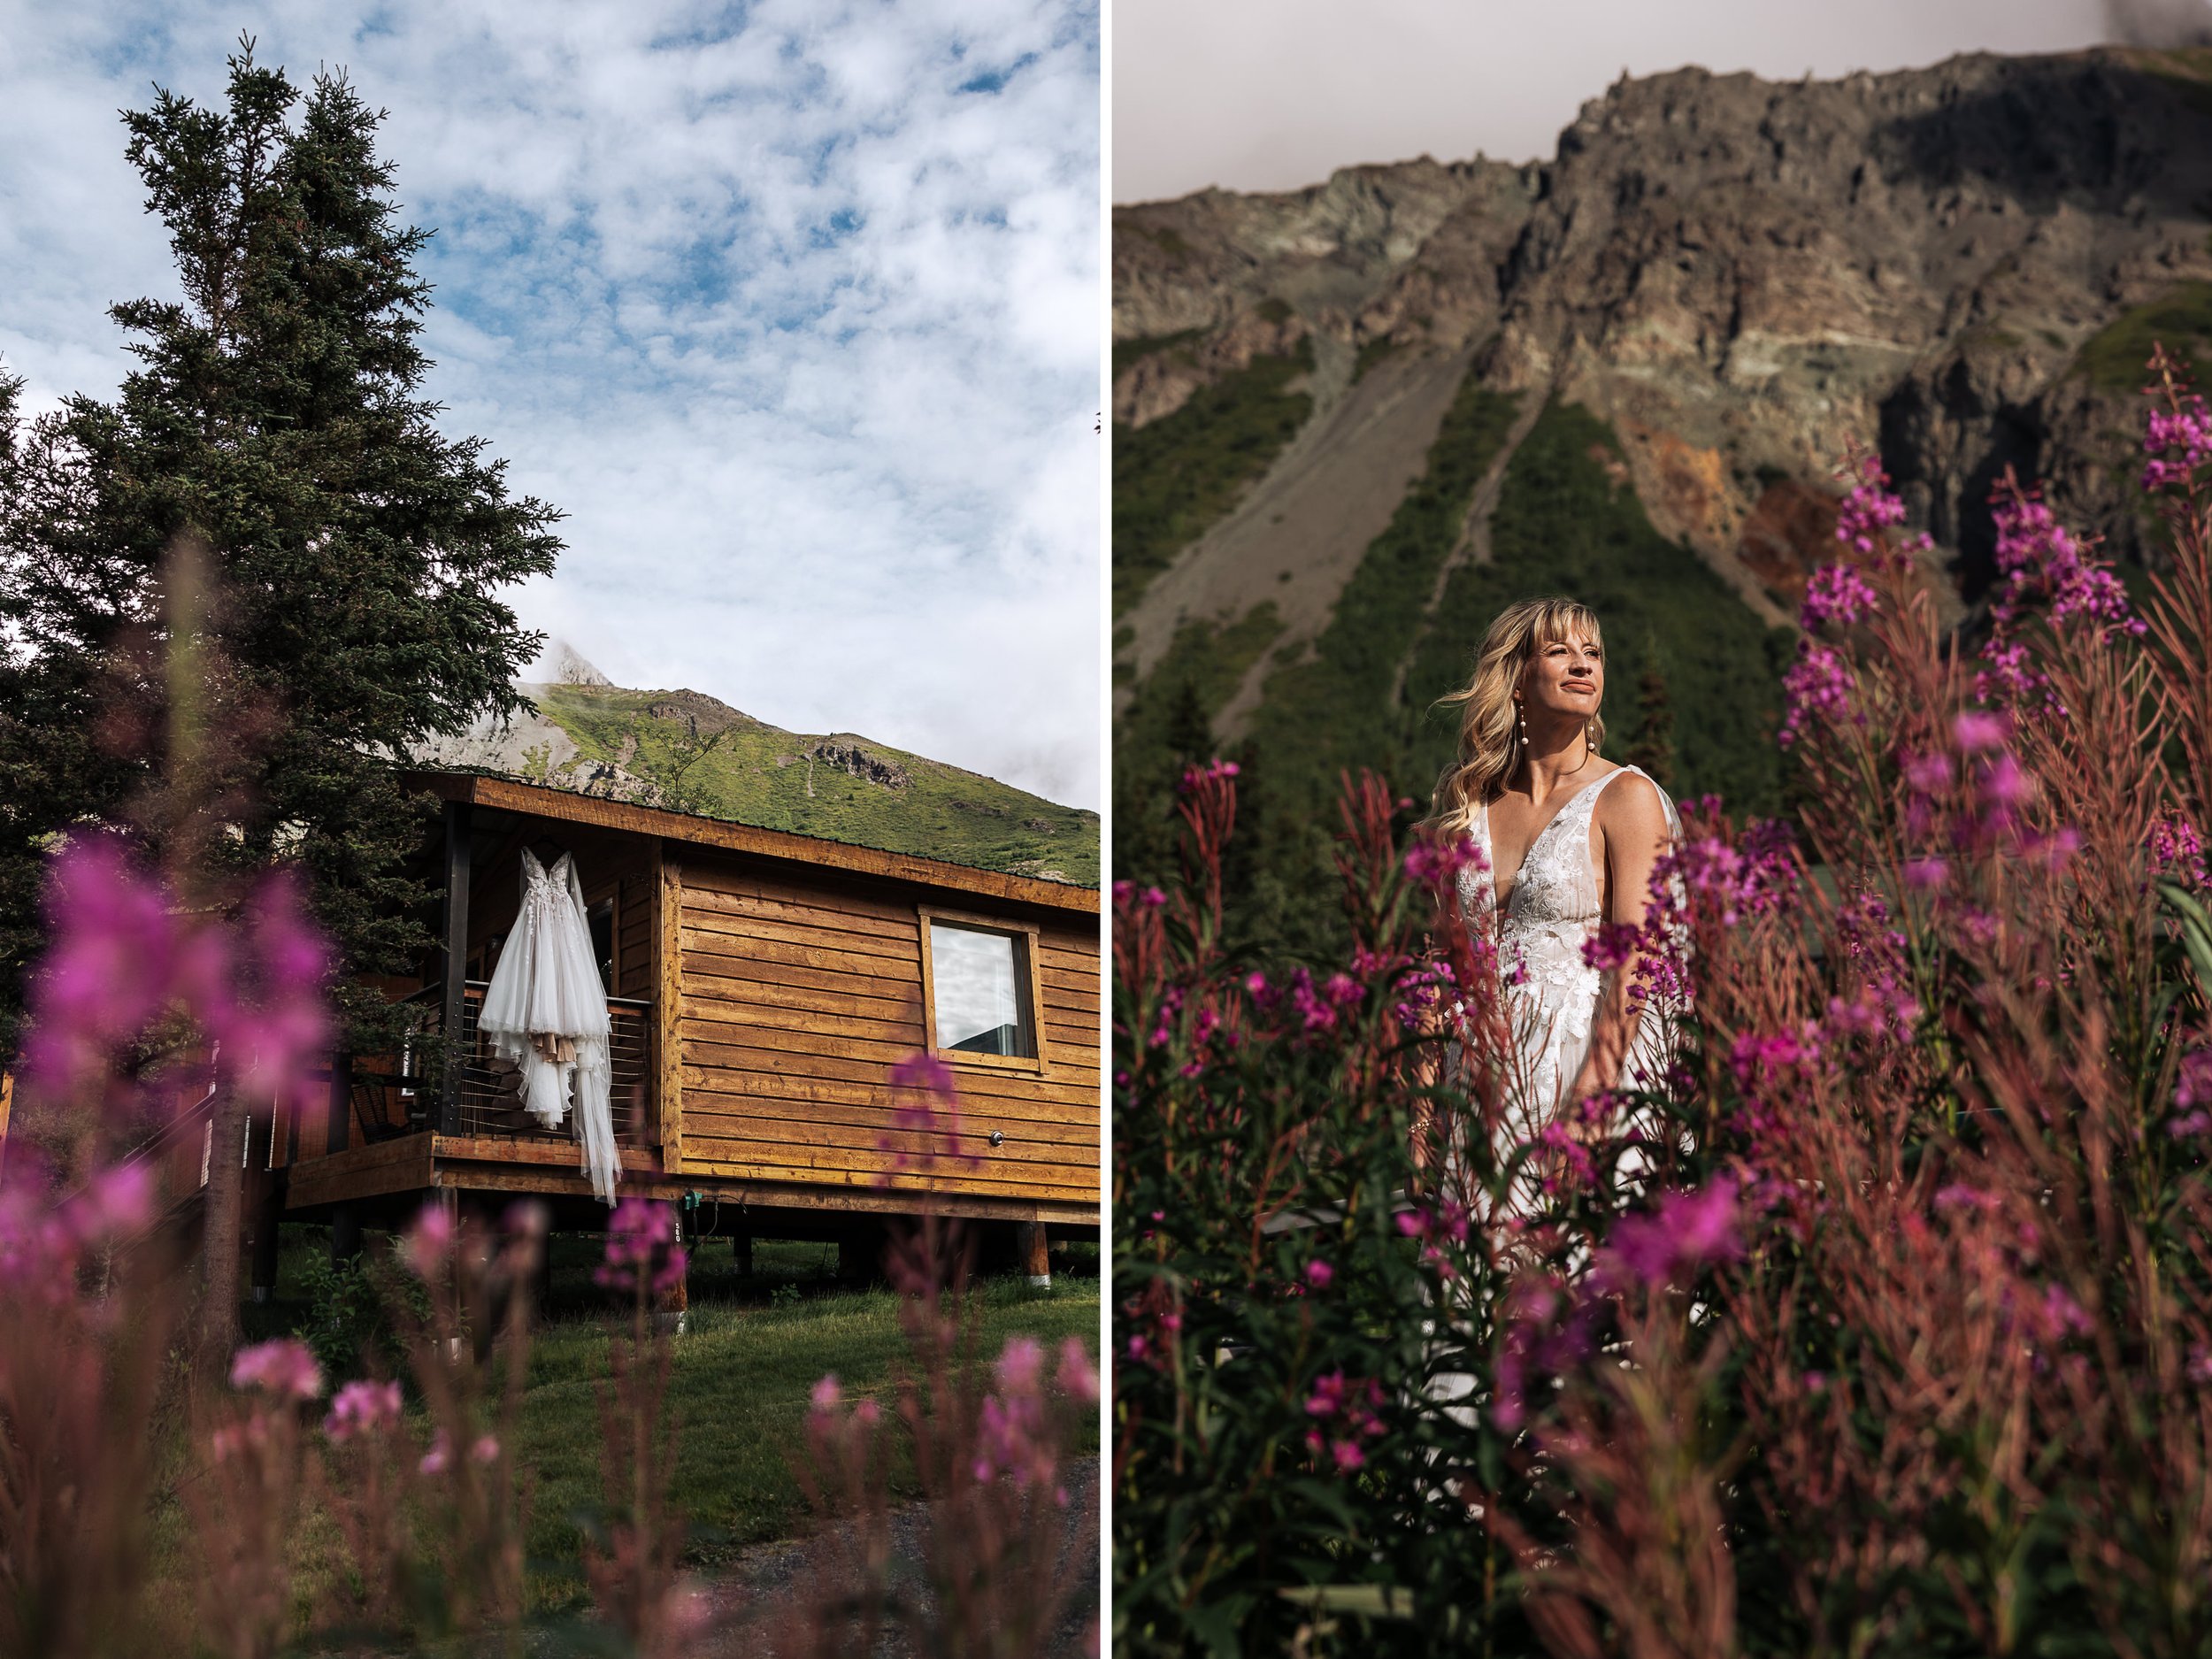 Intimate Family Elopement at Sheep Mountain Lodge in Alaska